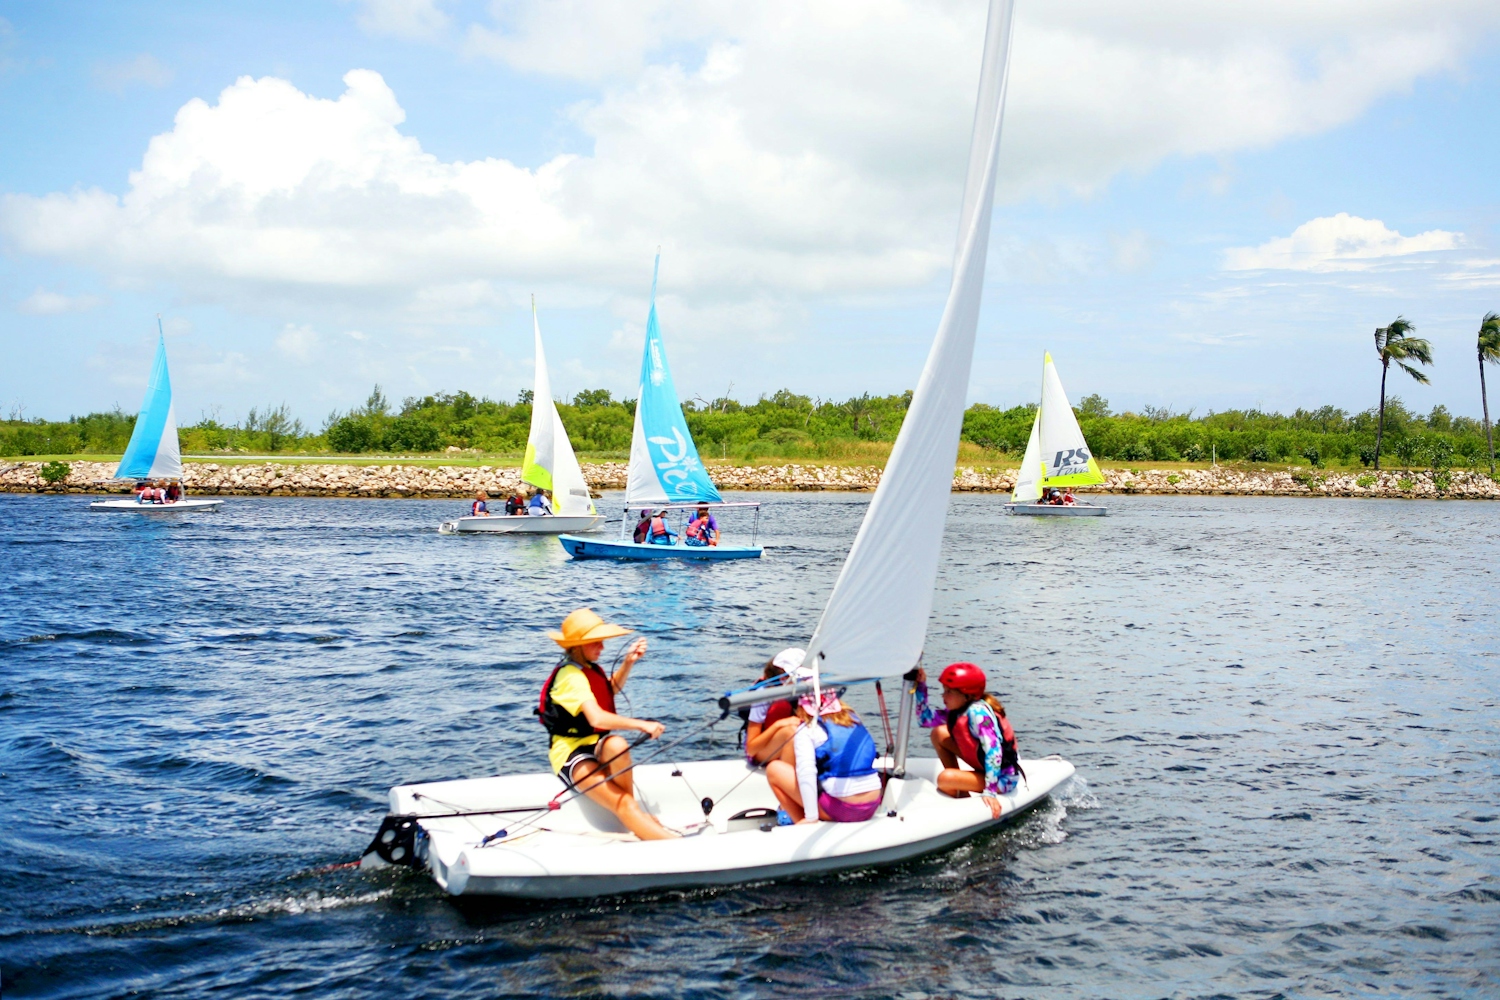 Several sailing boats in the waters of the Cayman Islands